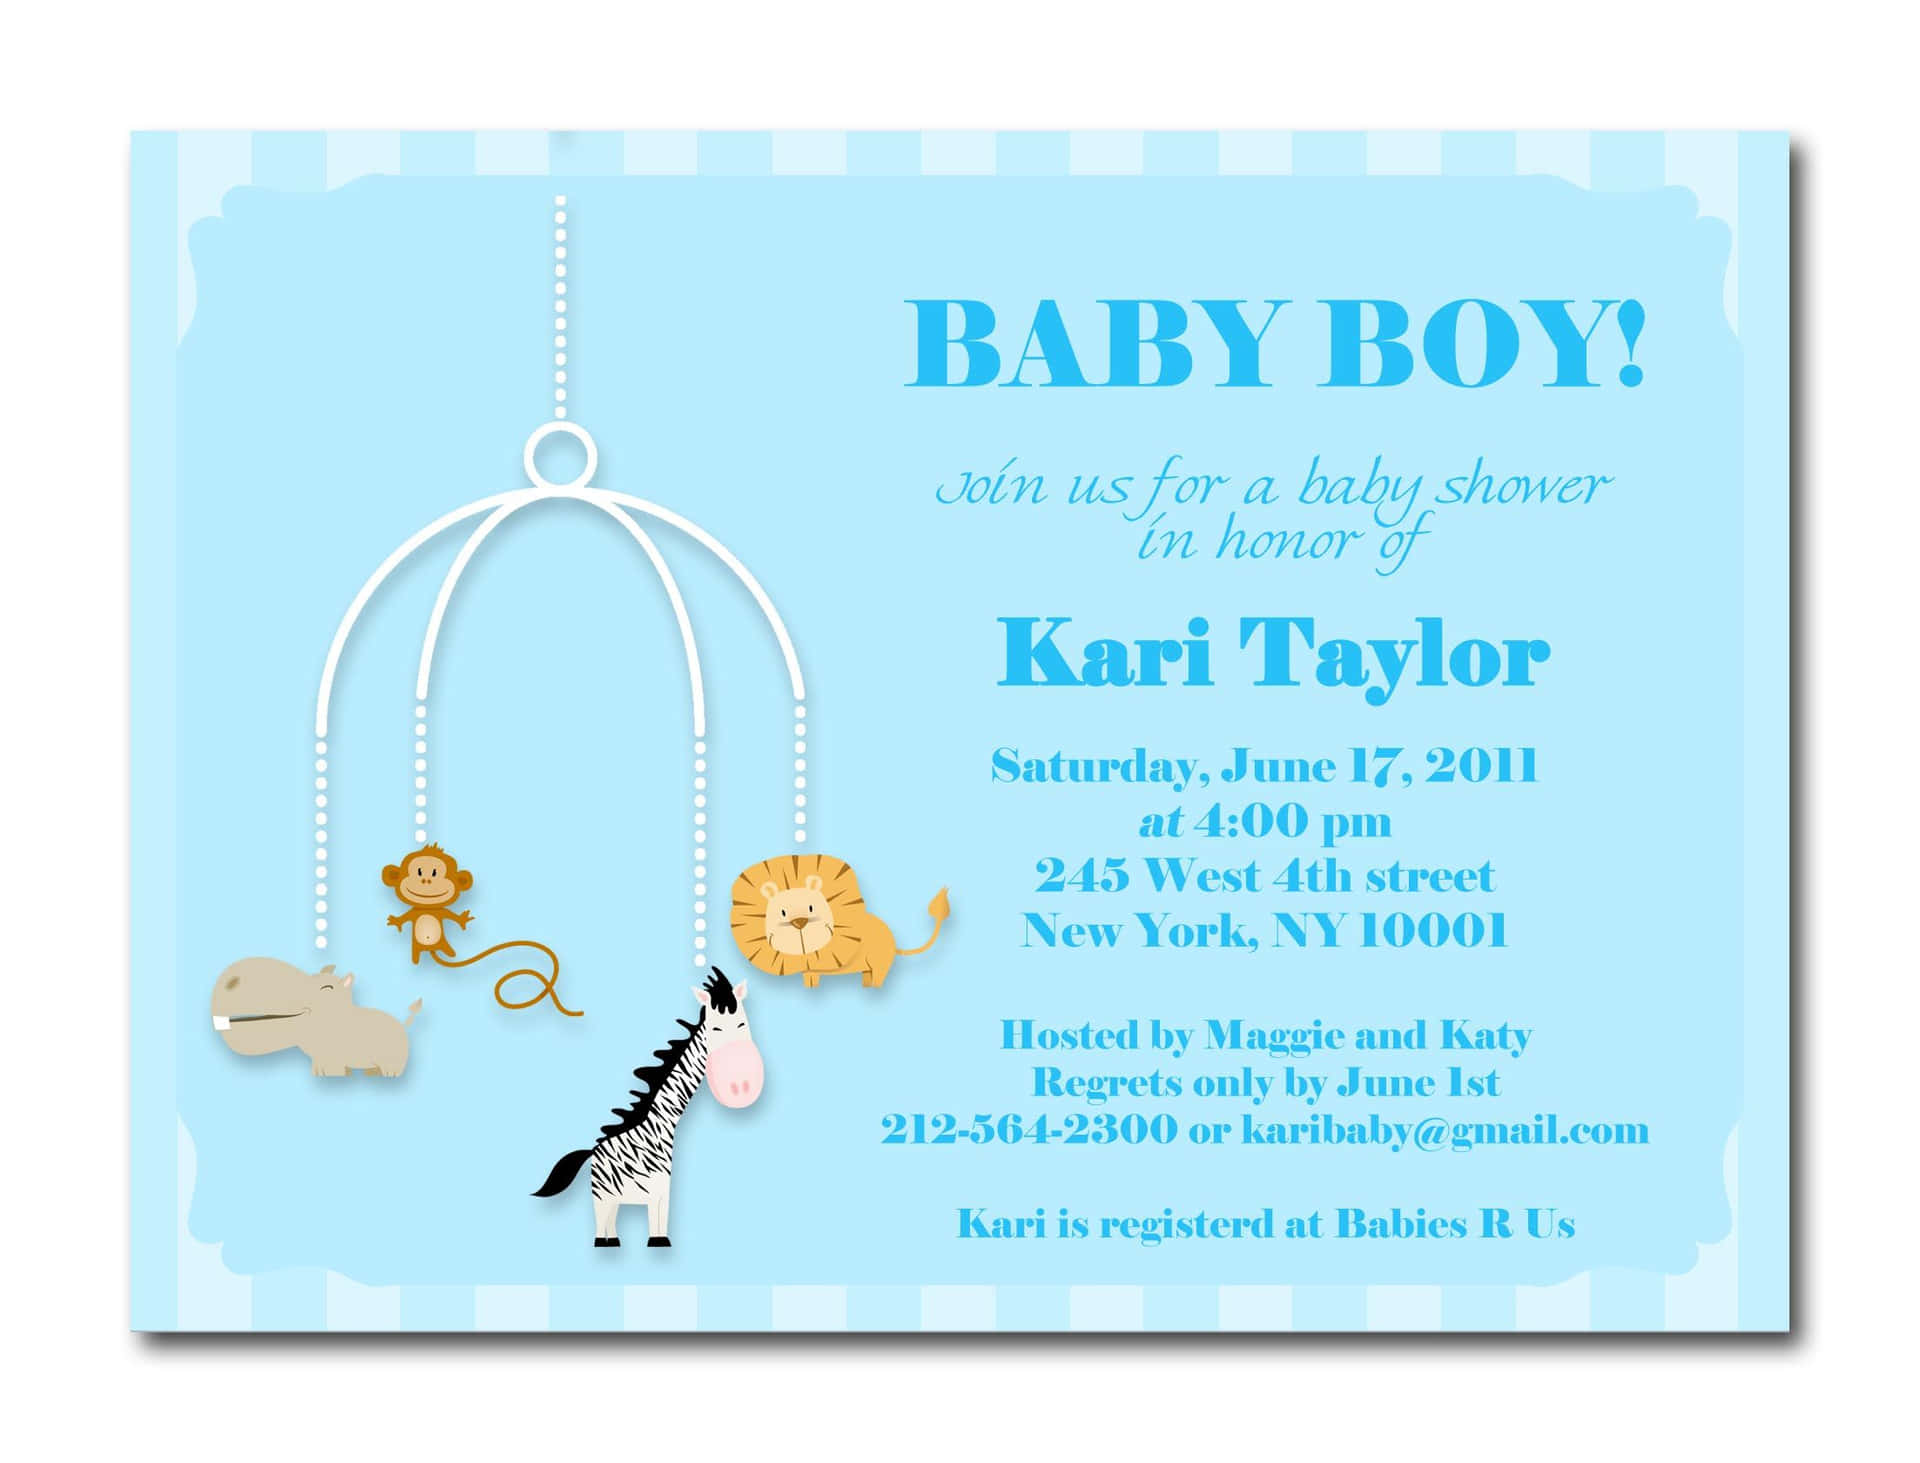 Celebrate the upcoming bundle of joy with a special baby shower!